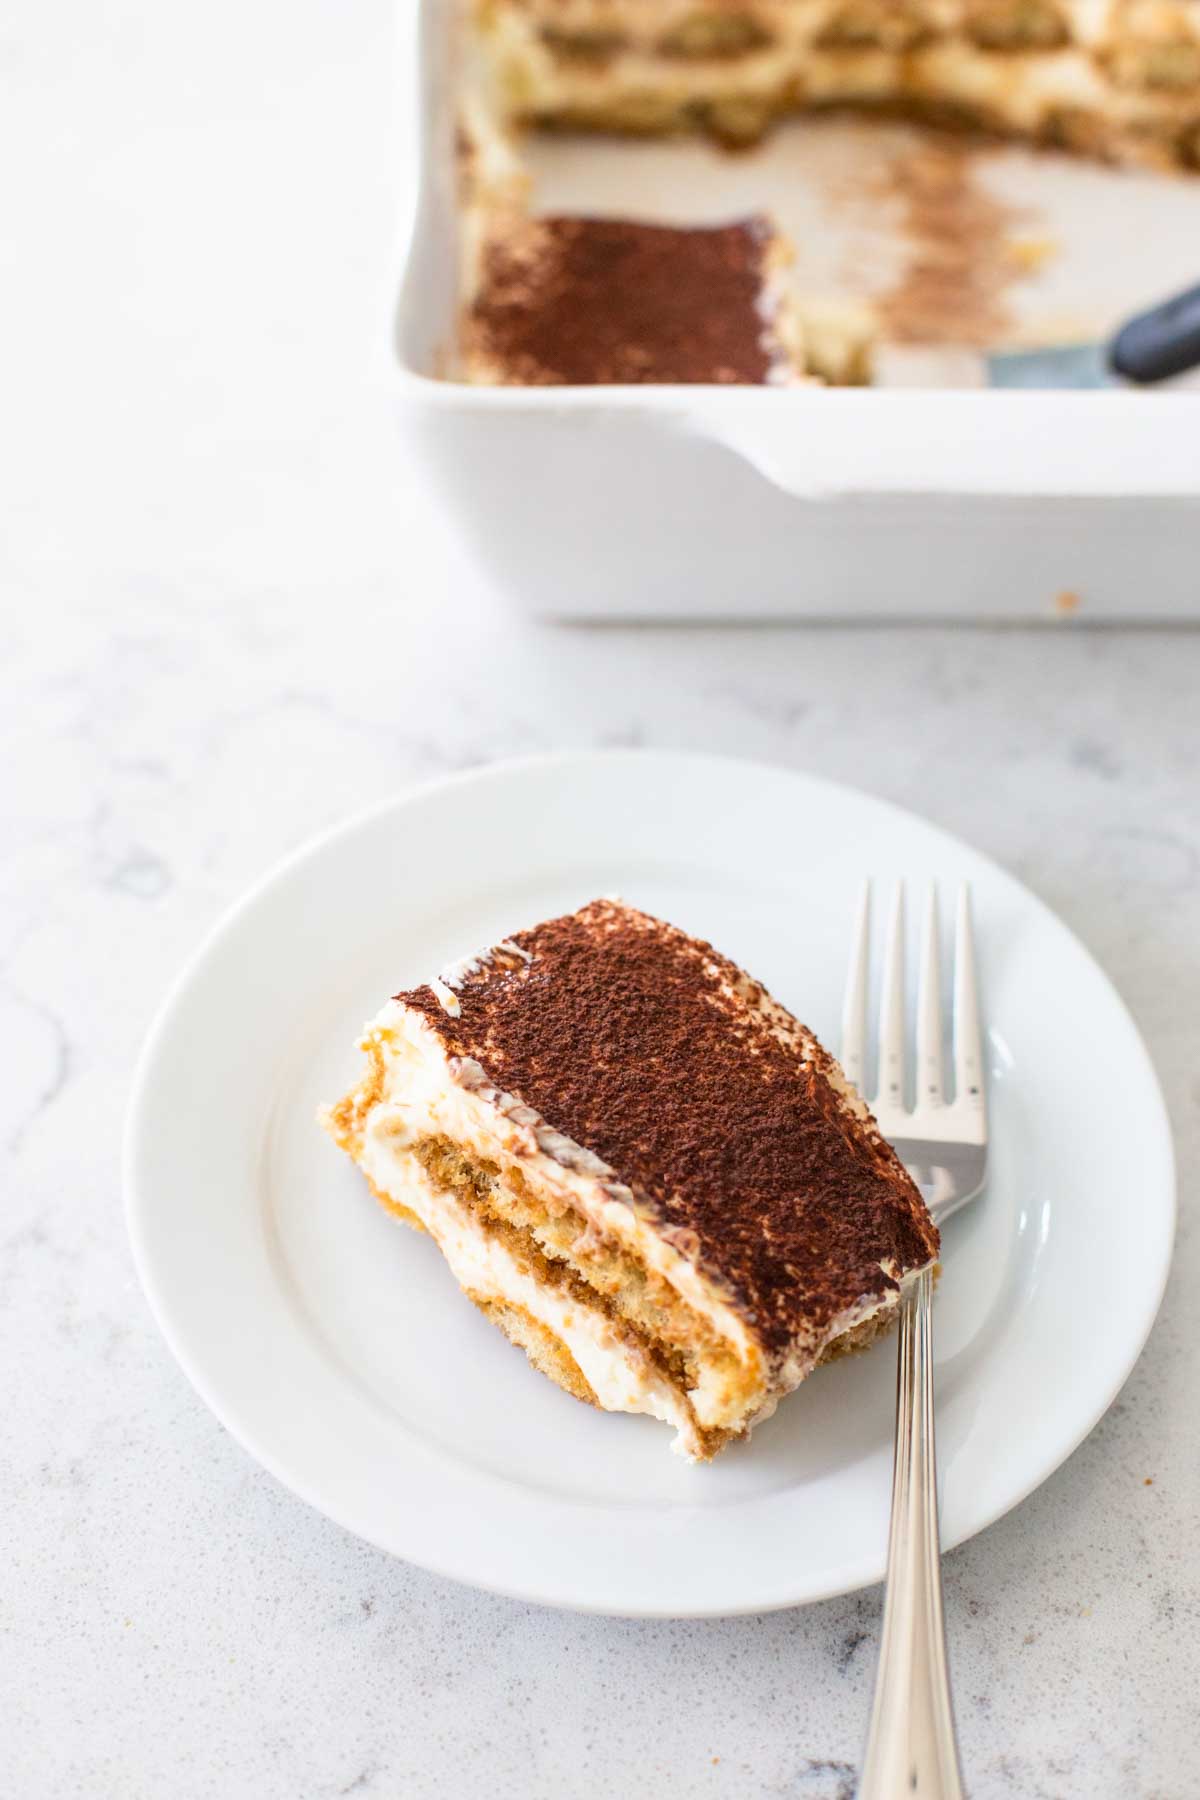 A serving of tiramisu is on a plate with a fork.